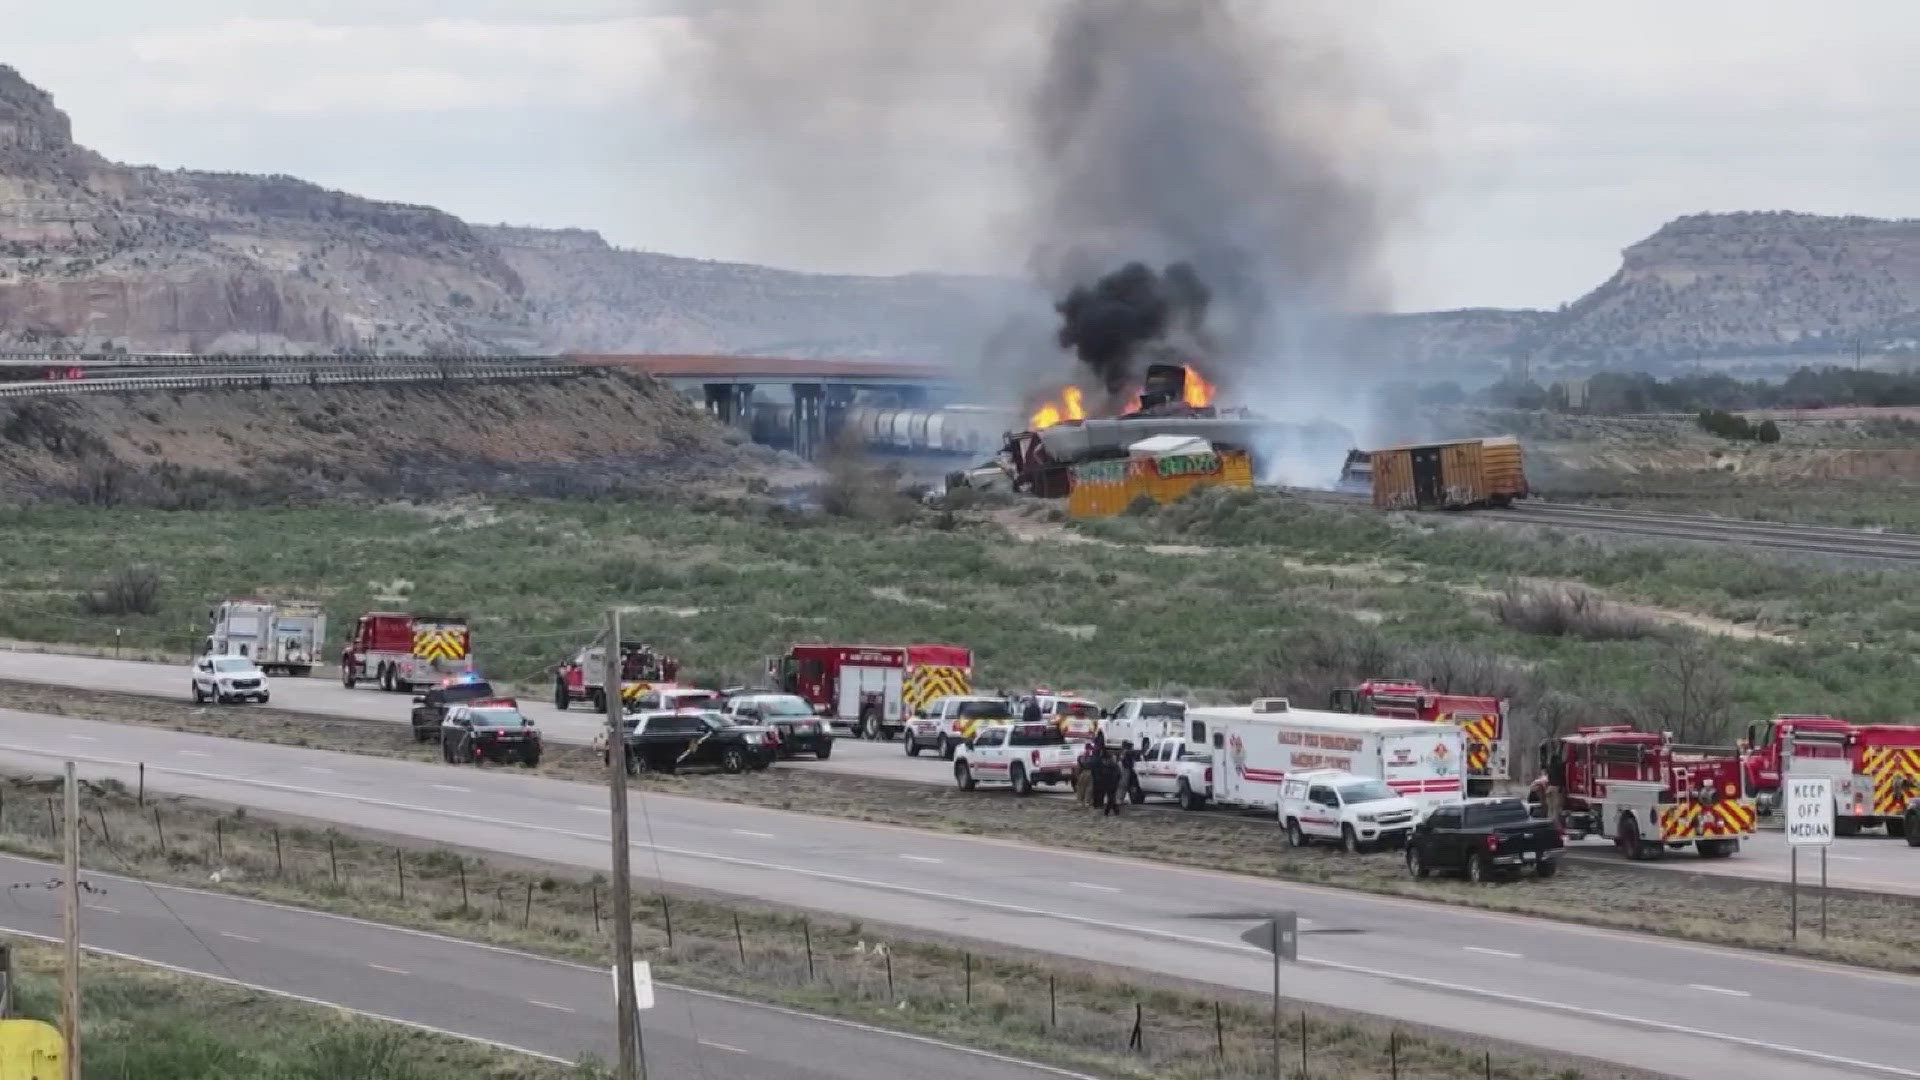 More than 24 hours after a train derailed and caught fire in western New Mexico, evacuations and road closures remain in place. Watch the video for more.